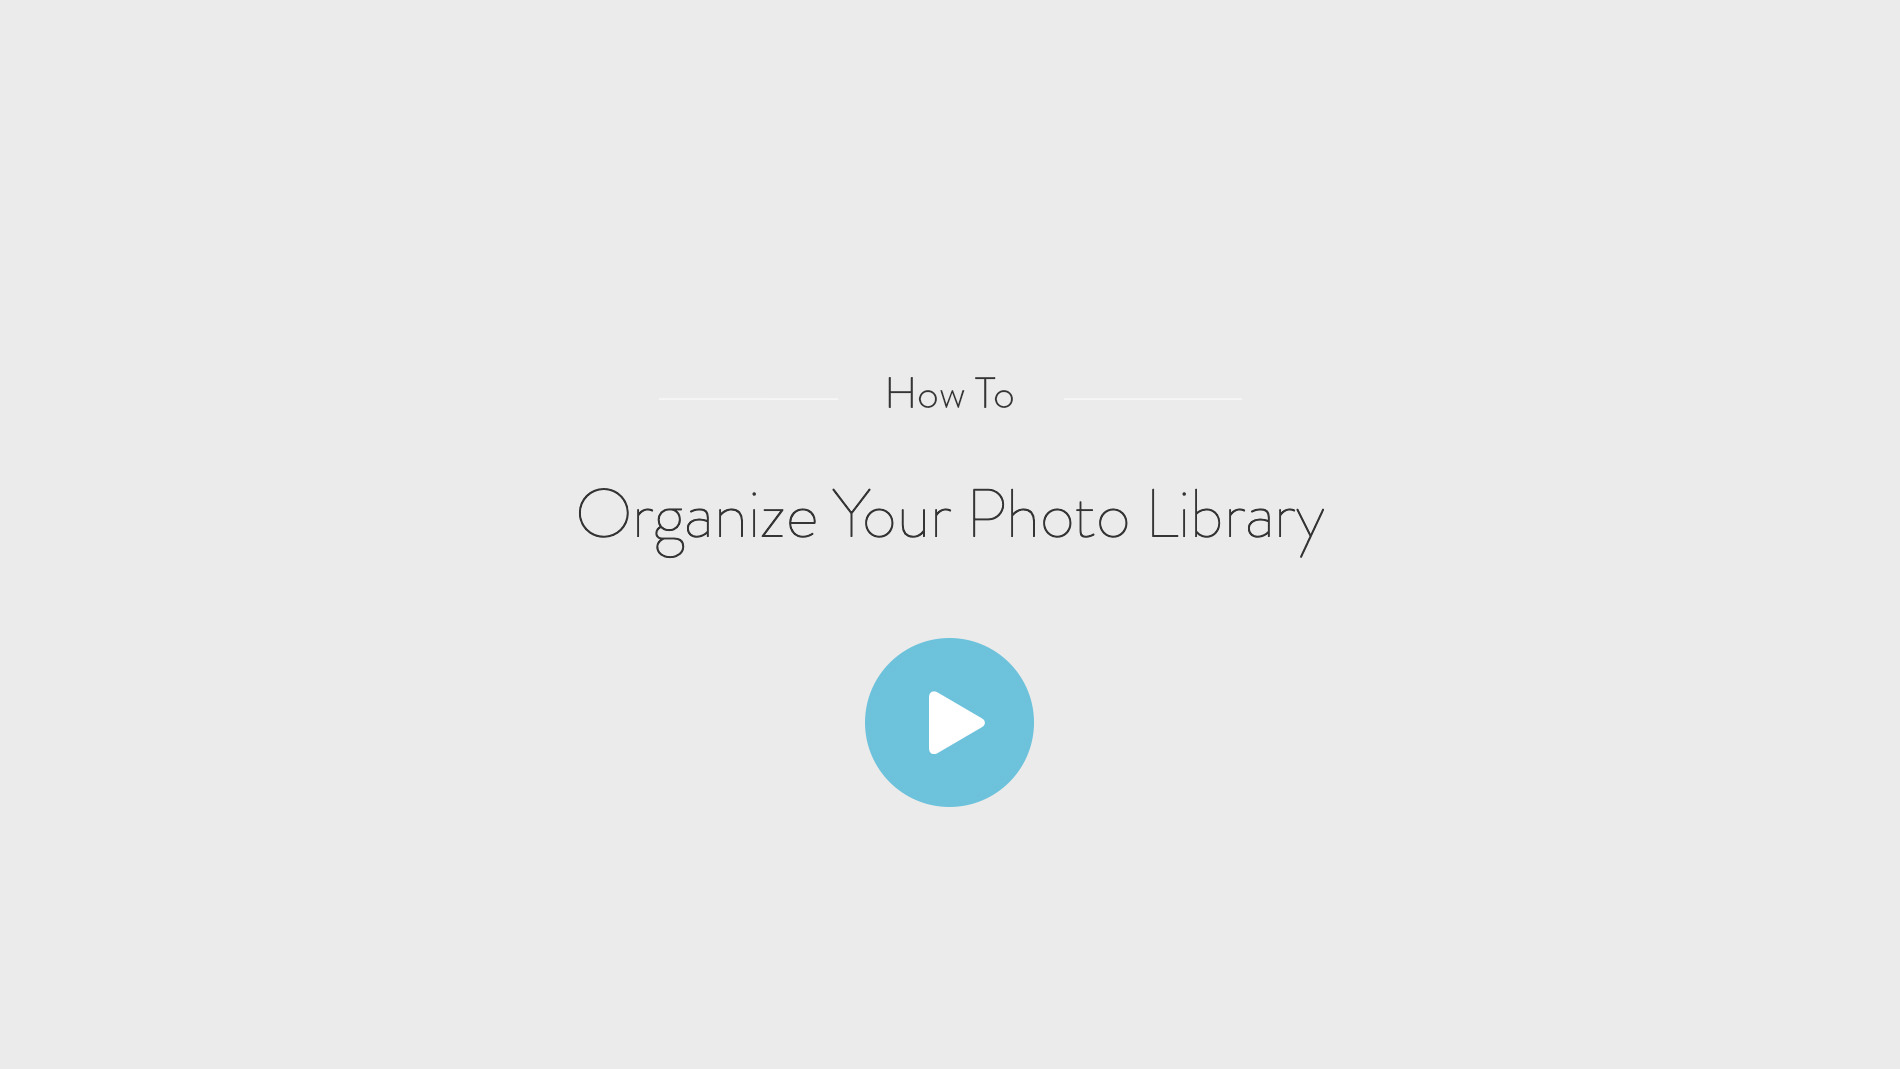 How To - Organize your photo library